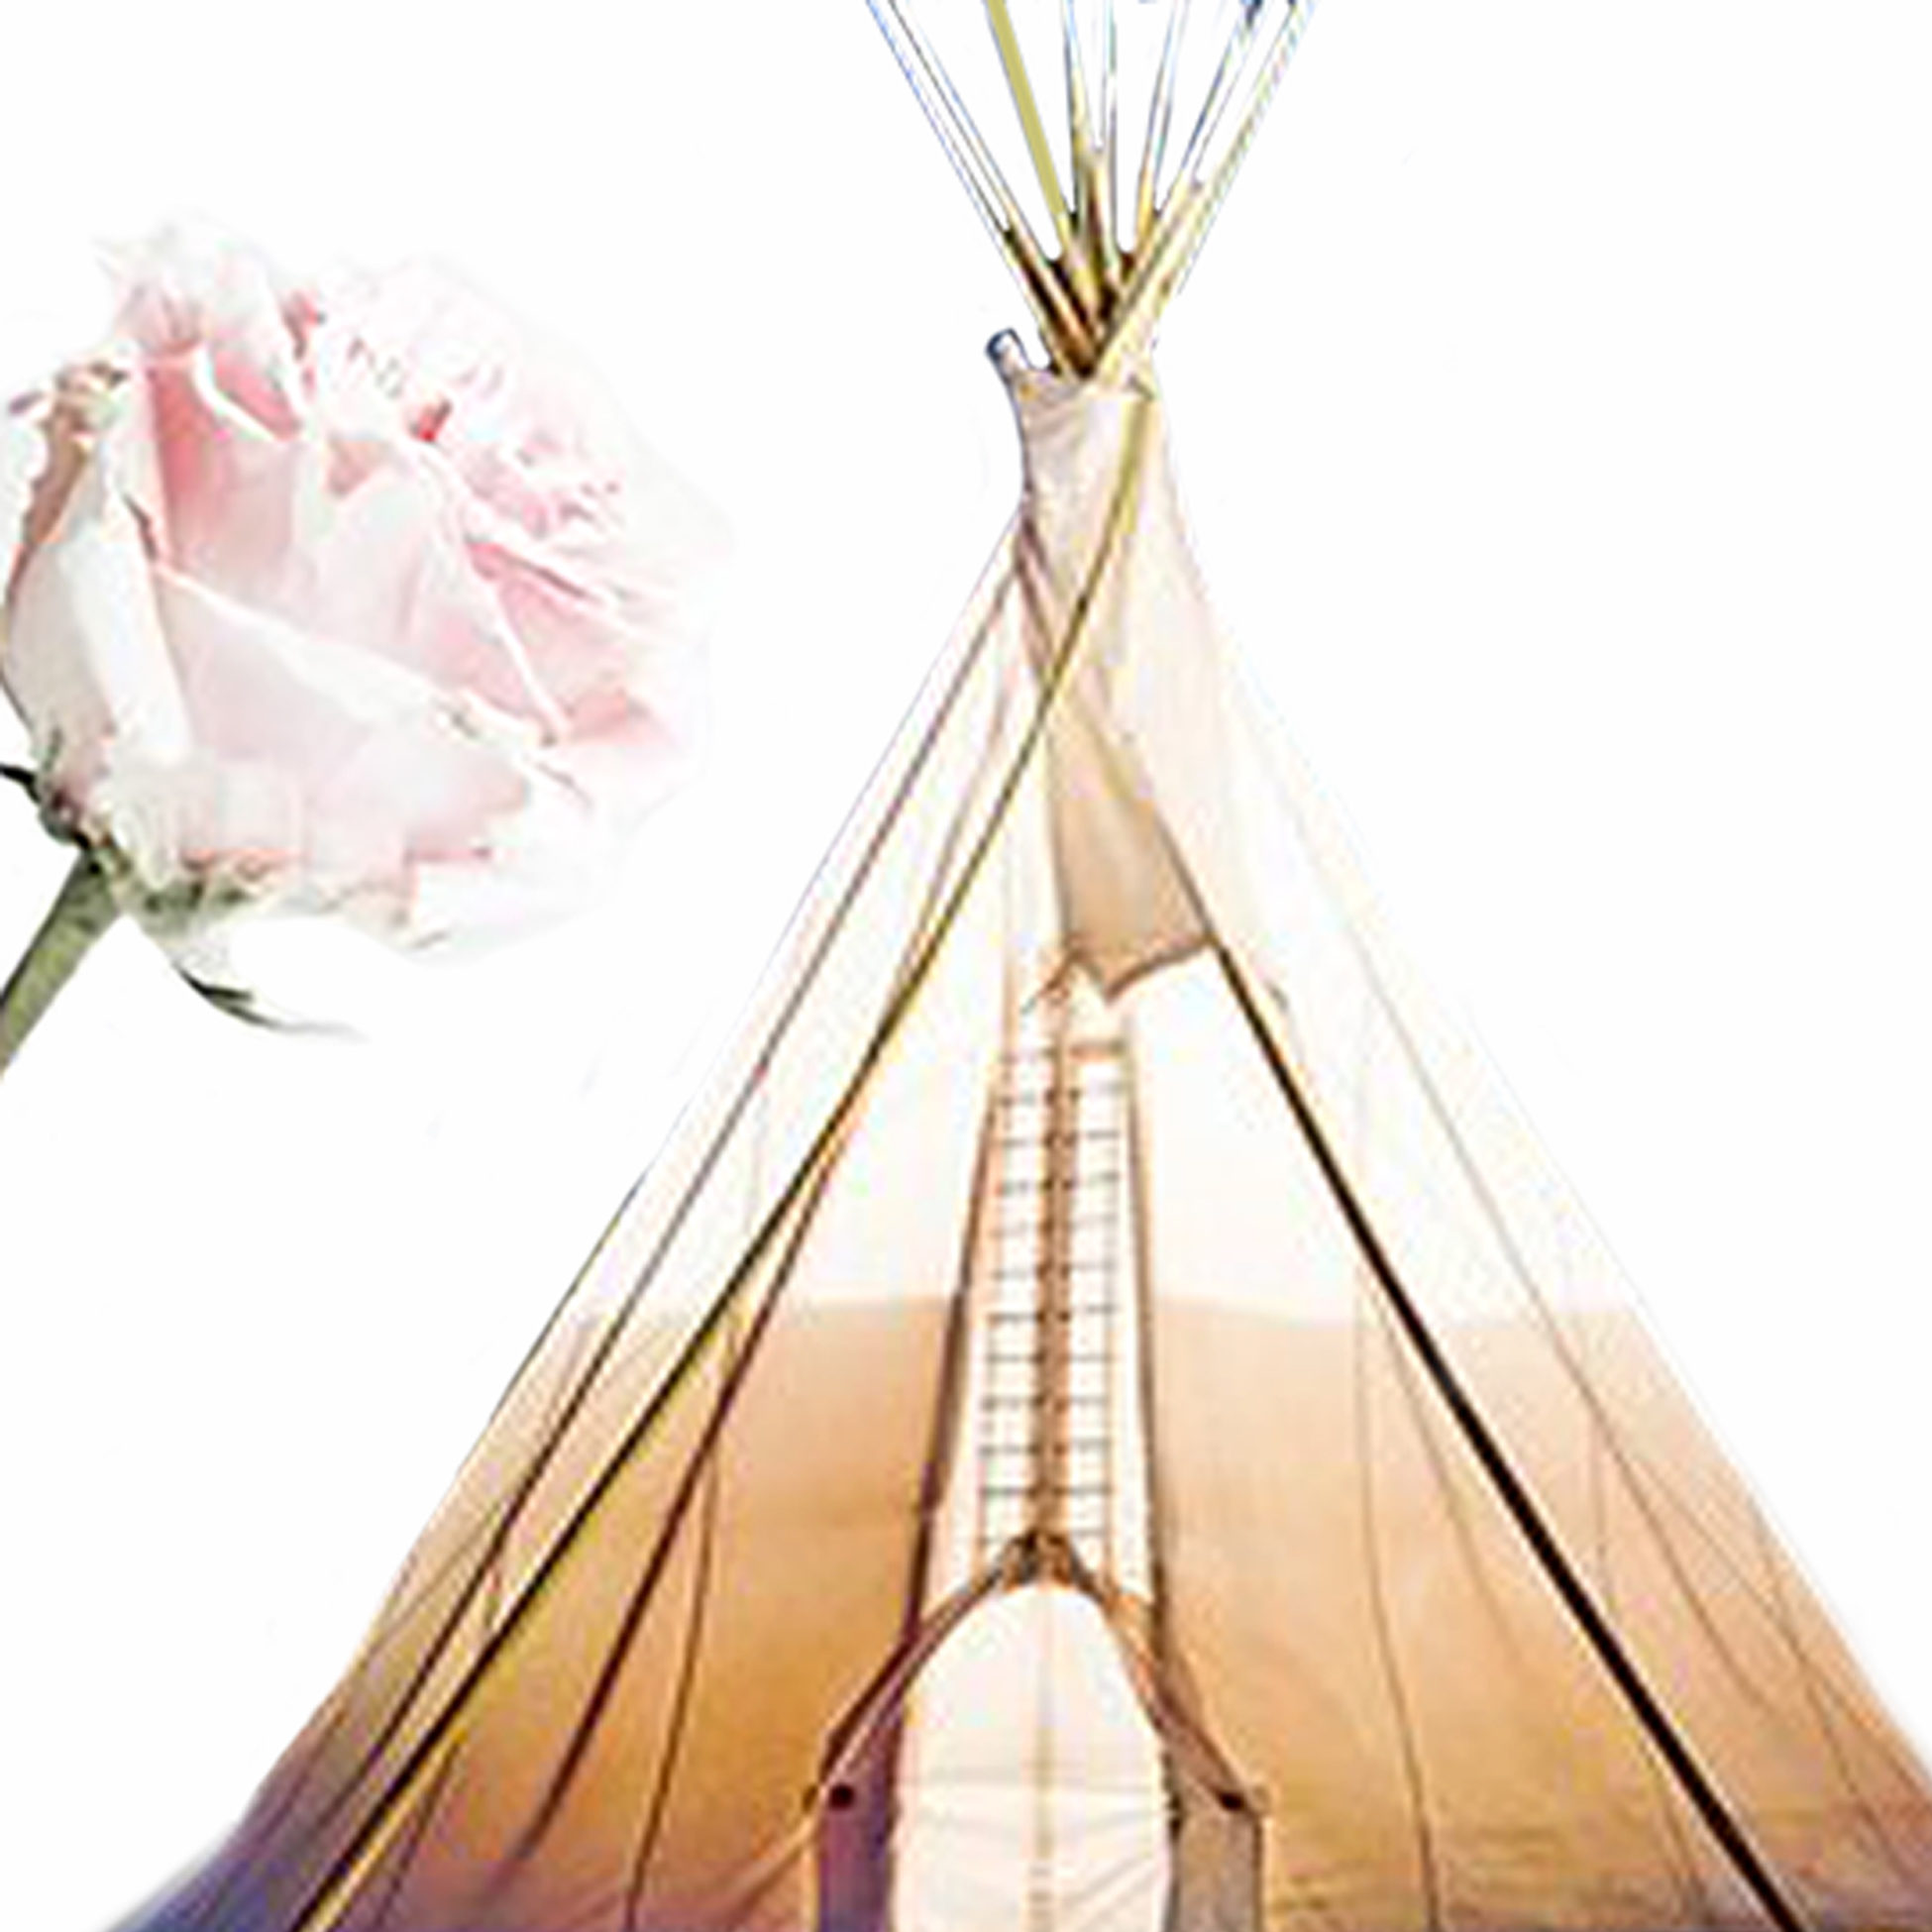 A gypsy in a past life, I covet quiet moments in our backyard tipi